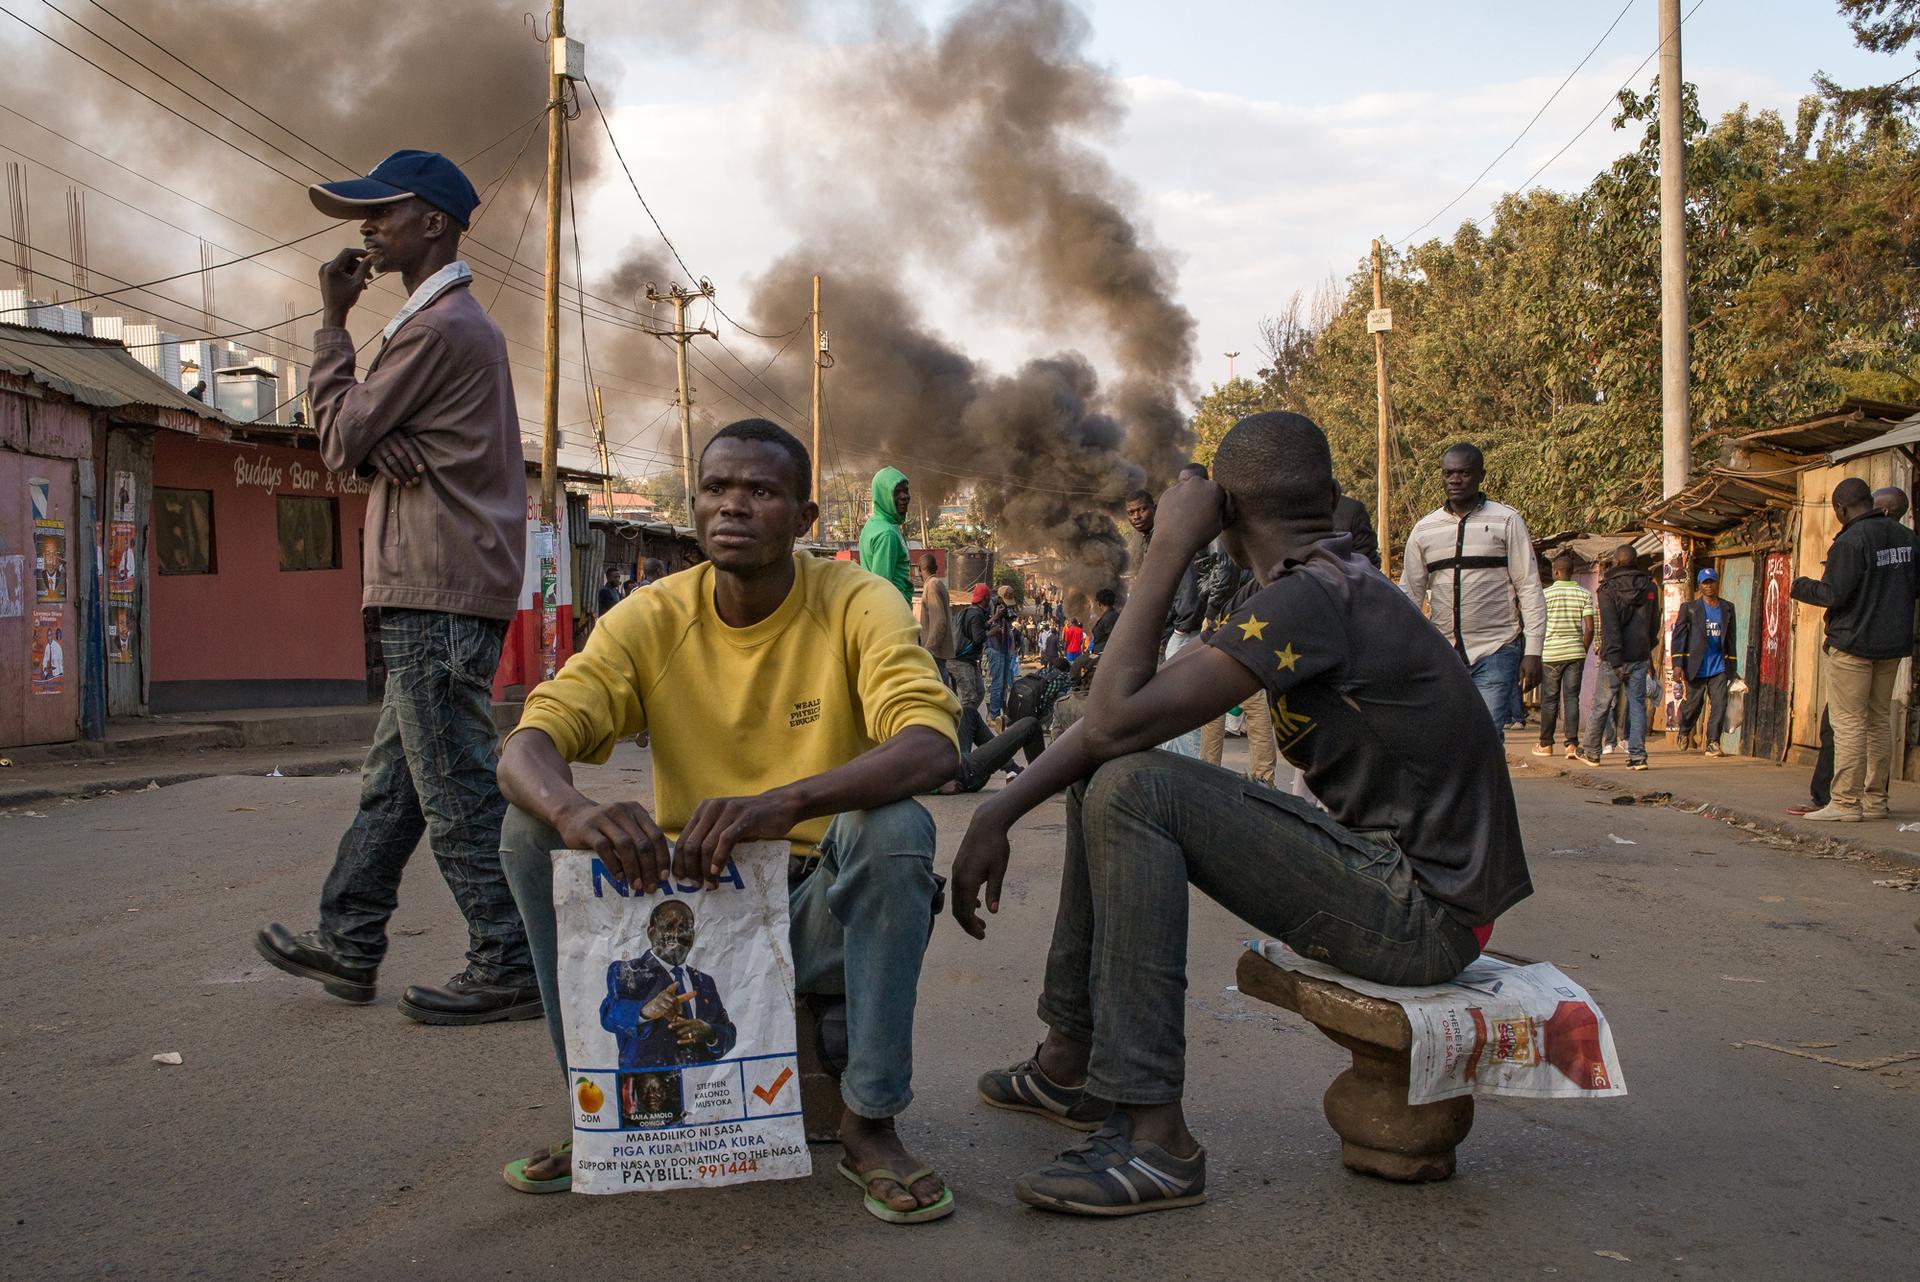 Men watch demonstrators light tires on fire in Nairobi’s informal settlement of Kaibera. The demonstration quickly turned violent as demonstrators armed themselves with stones and clubs bearing nails Wednesday evening.